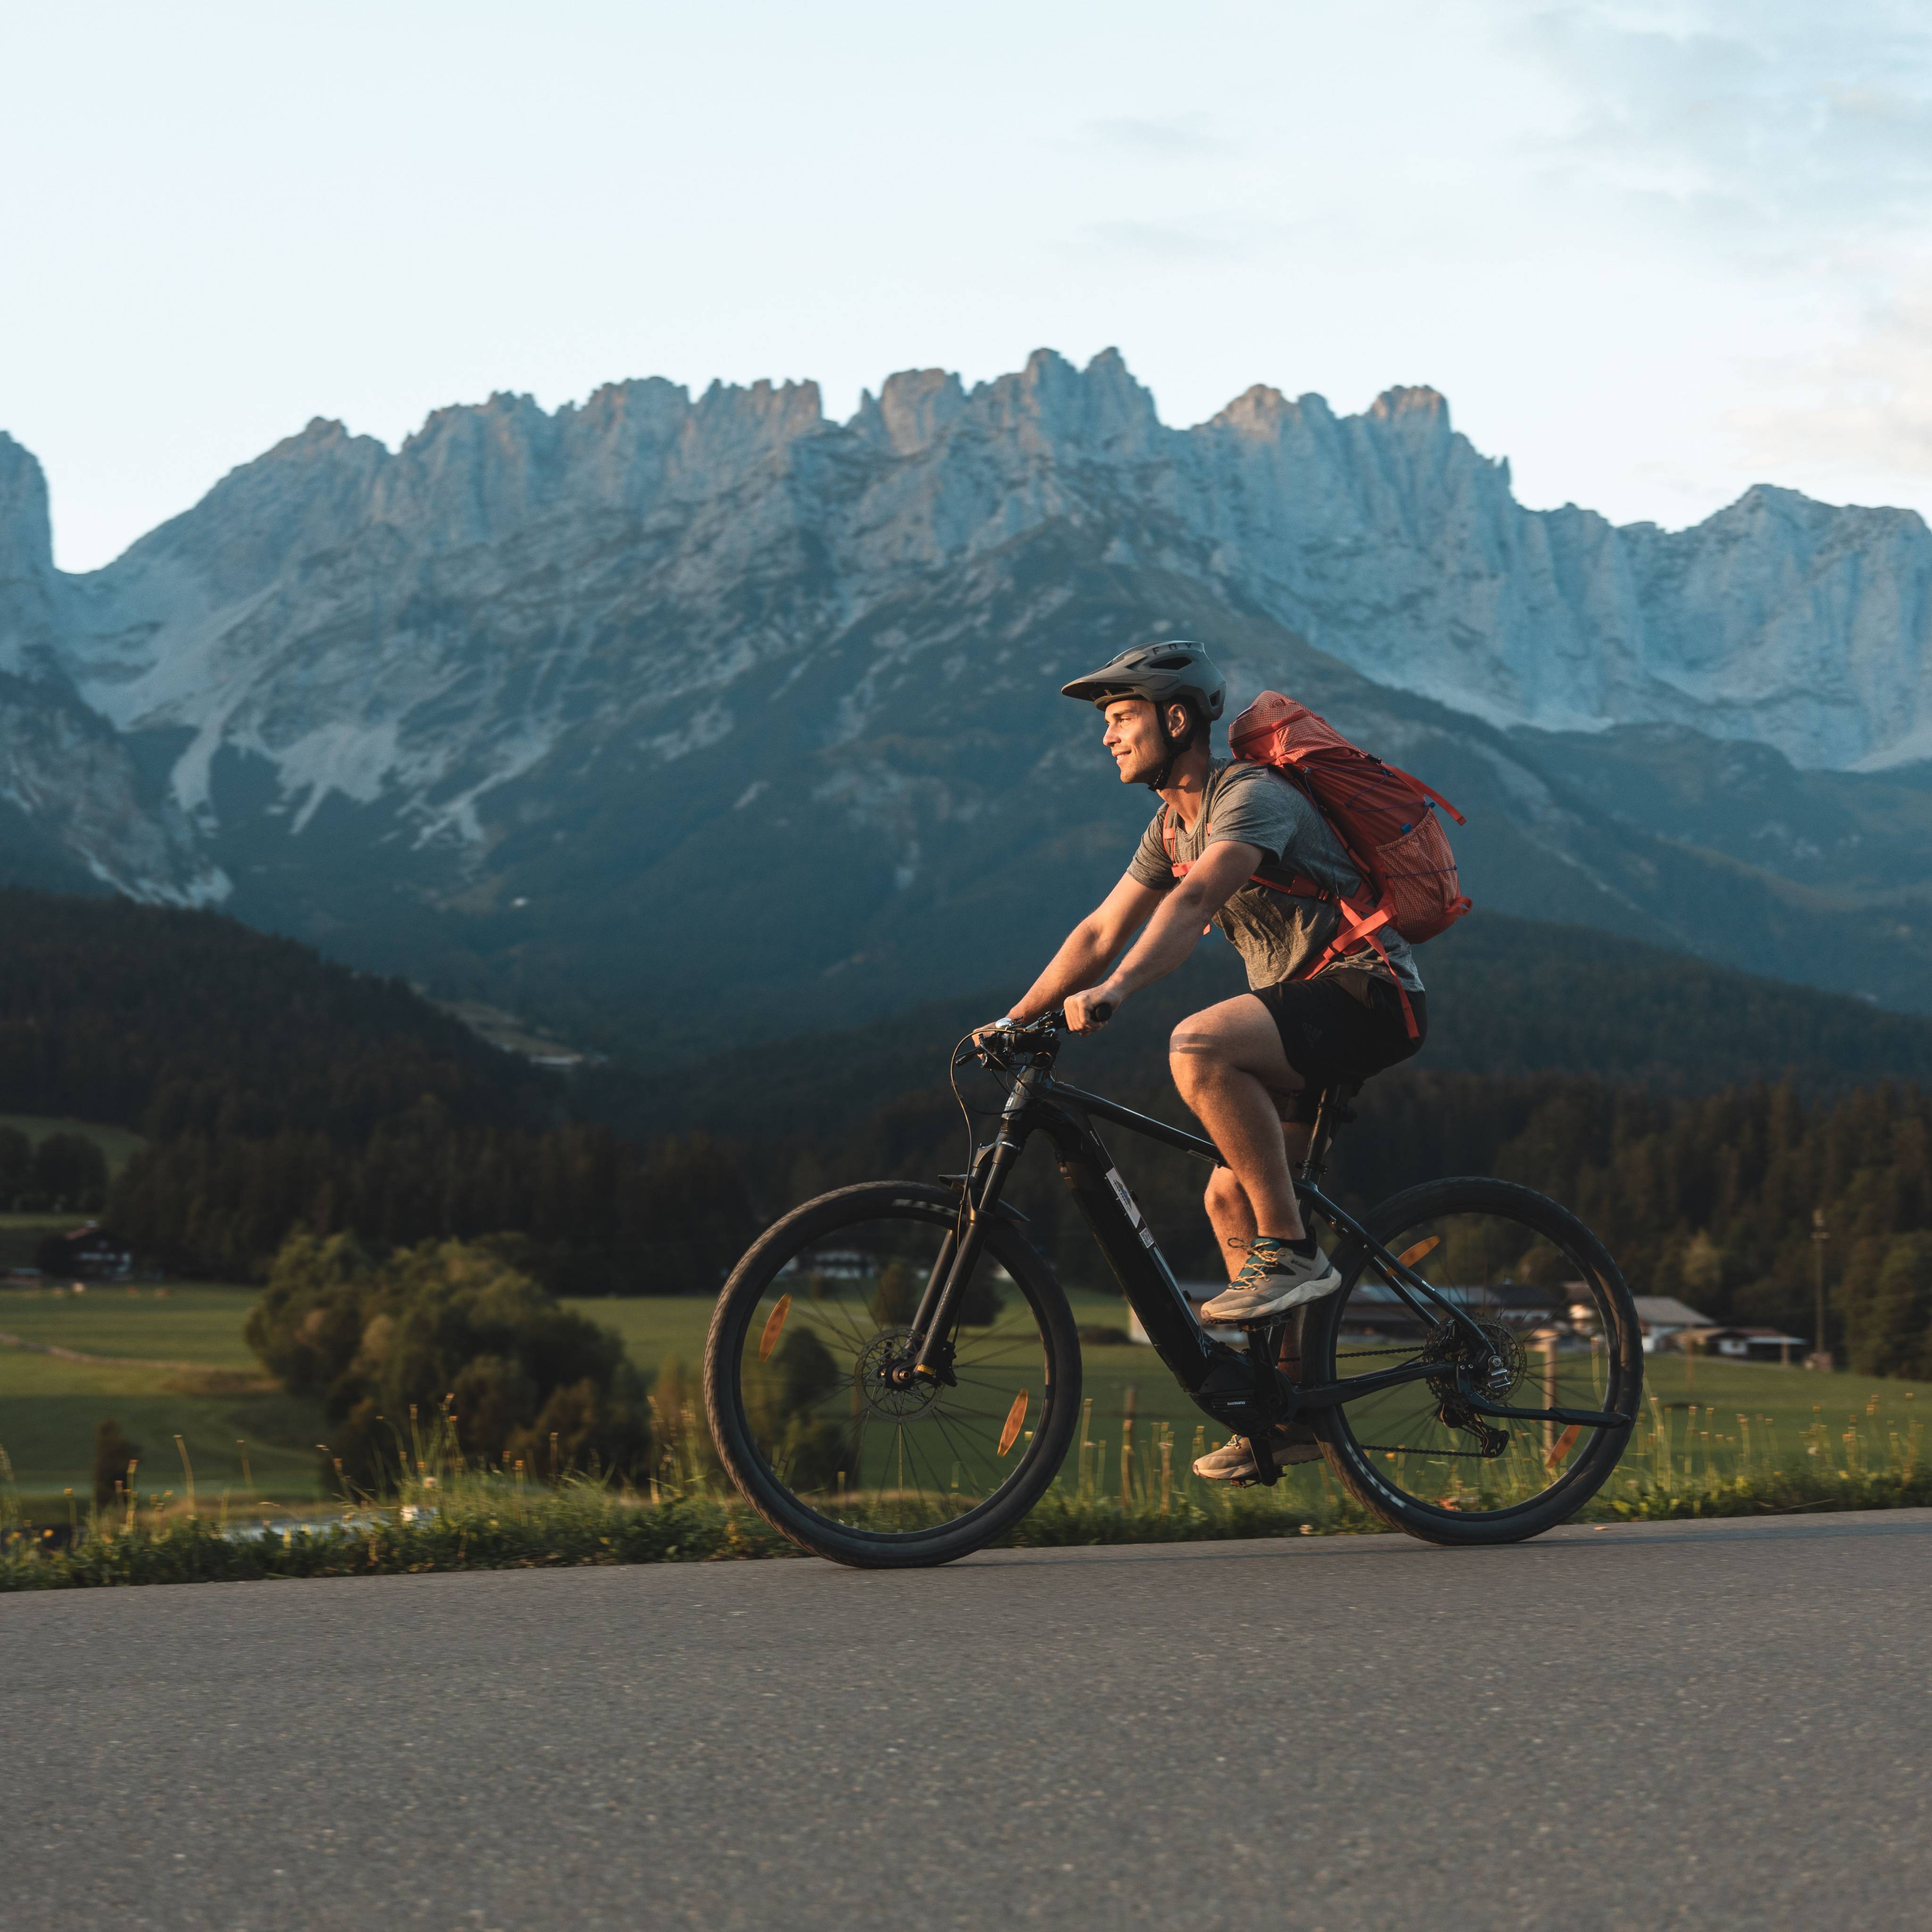 Activities at the Wilder Kaiser: Exploring Tyrol on two wheels - Das Alpin